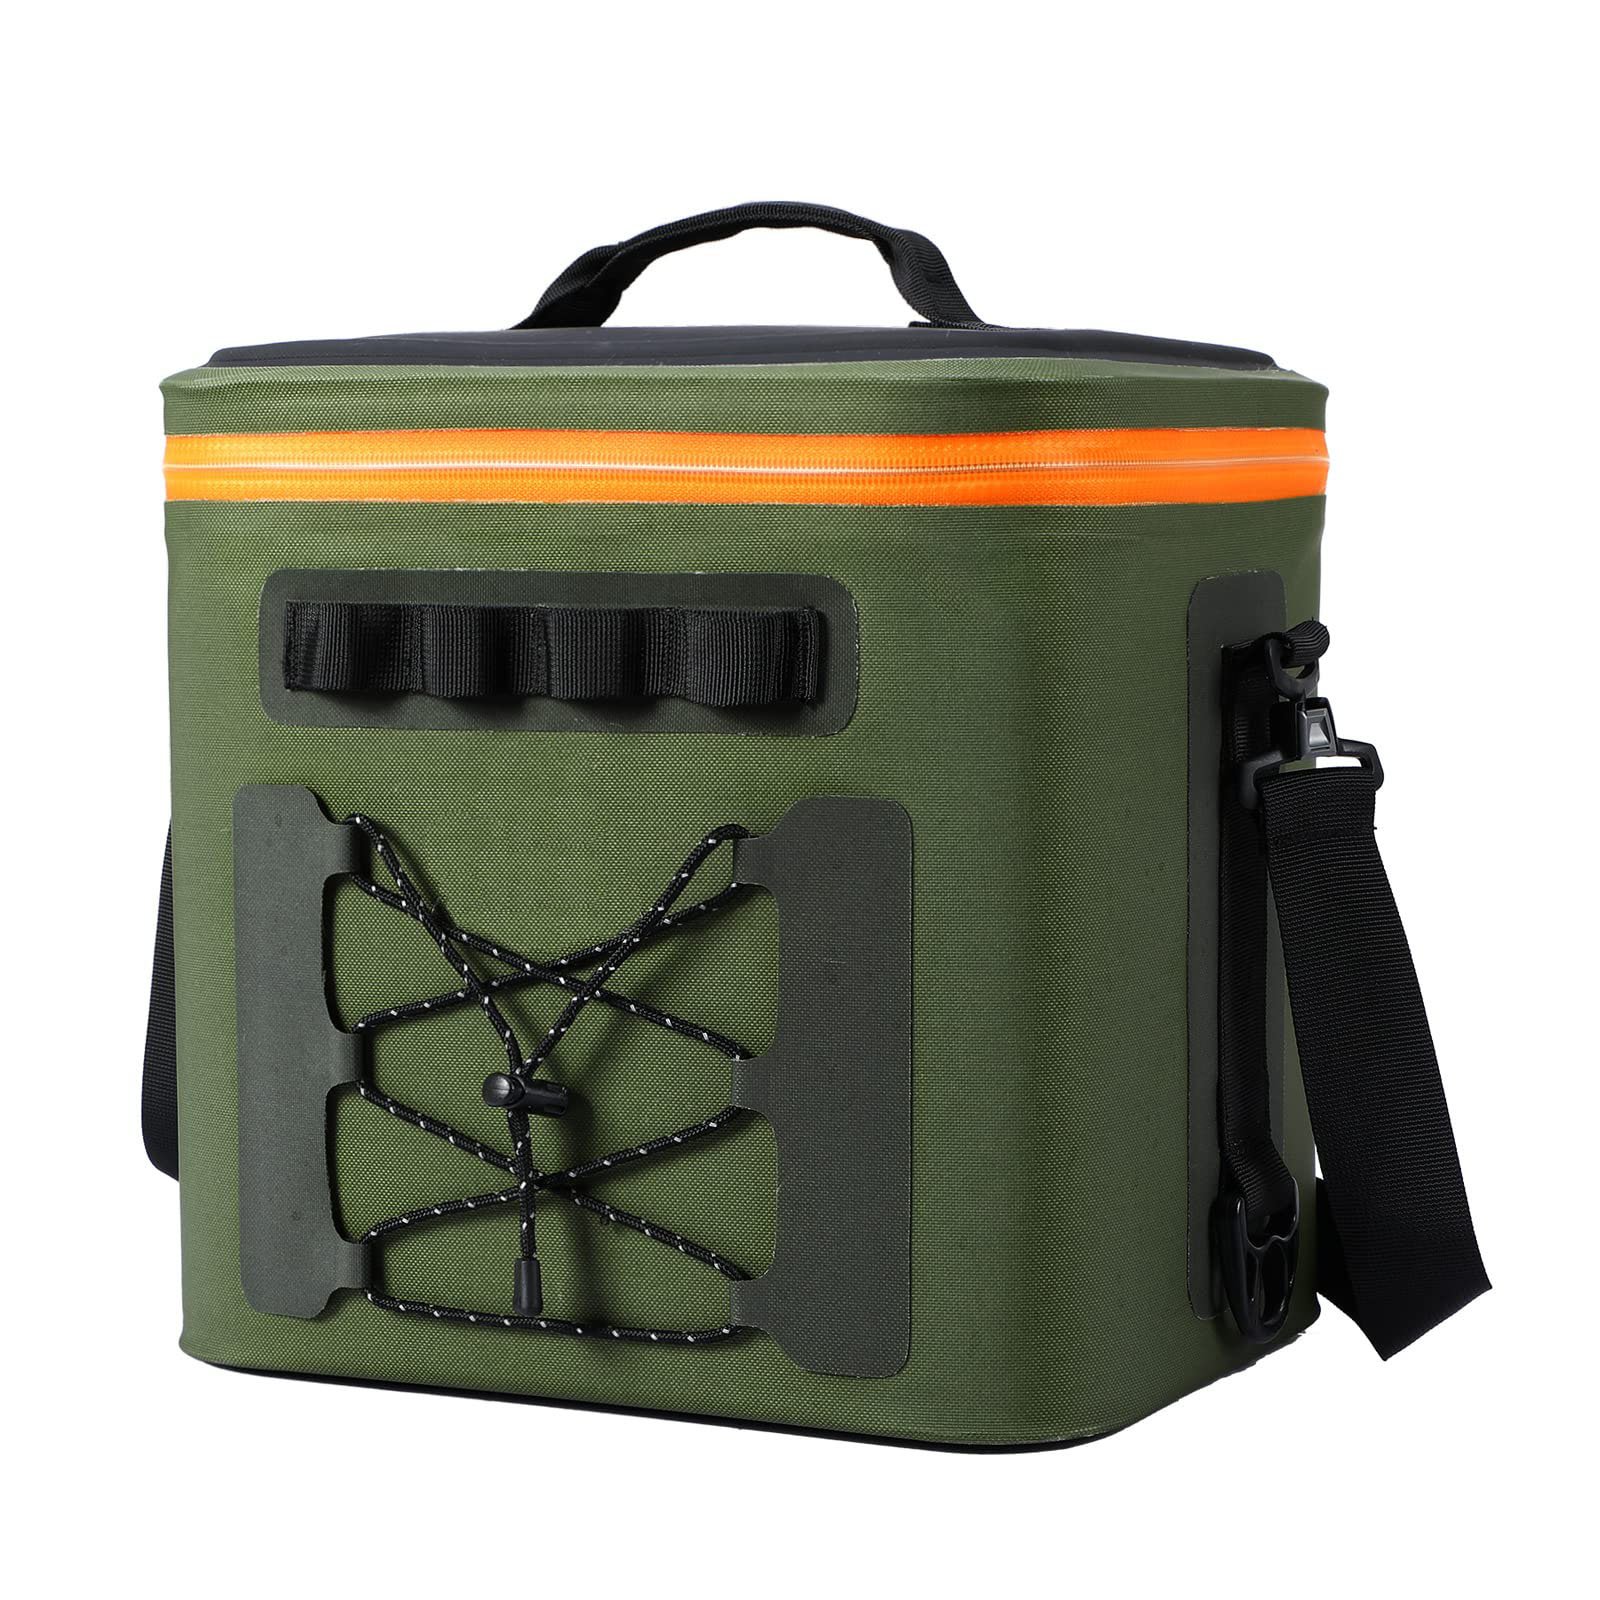 Soft Cooler Insulated Leakproof Soft Sided Coolers Waterproof Airtight Ice Chest Cooler